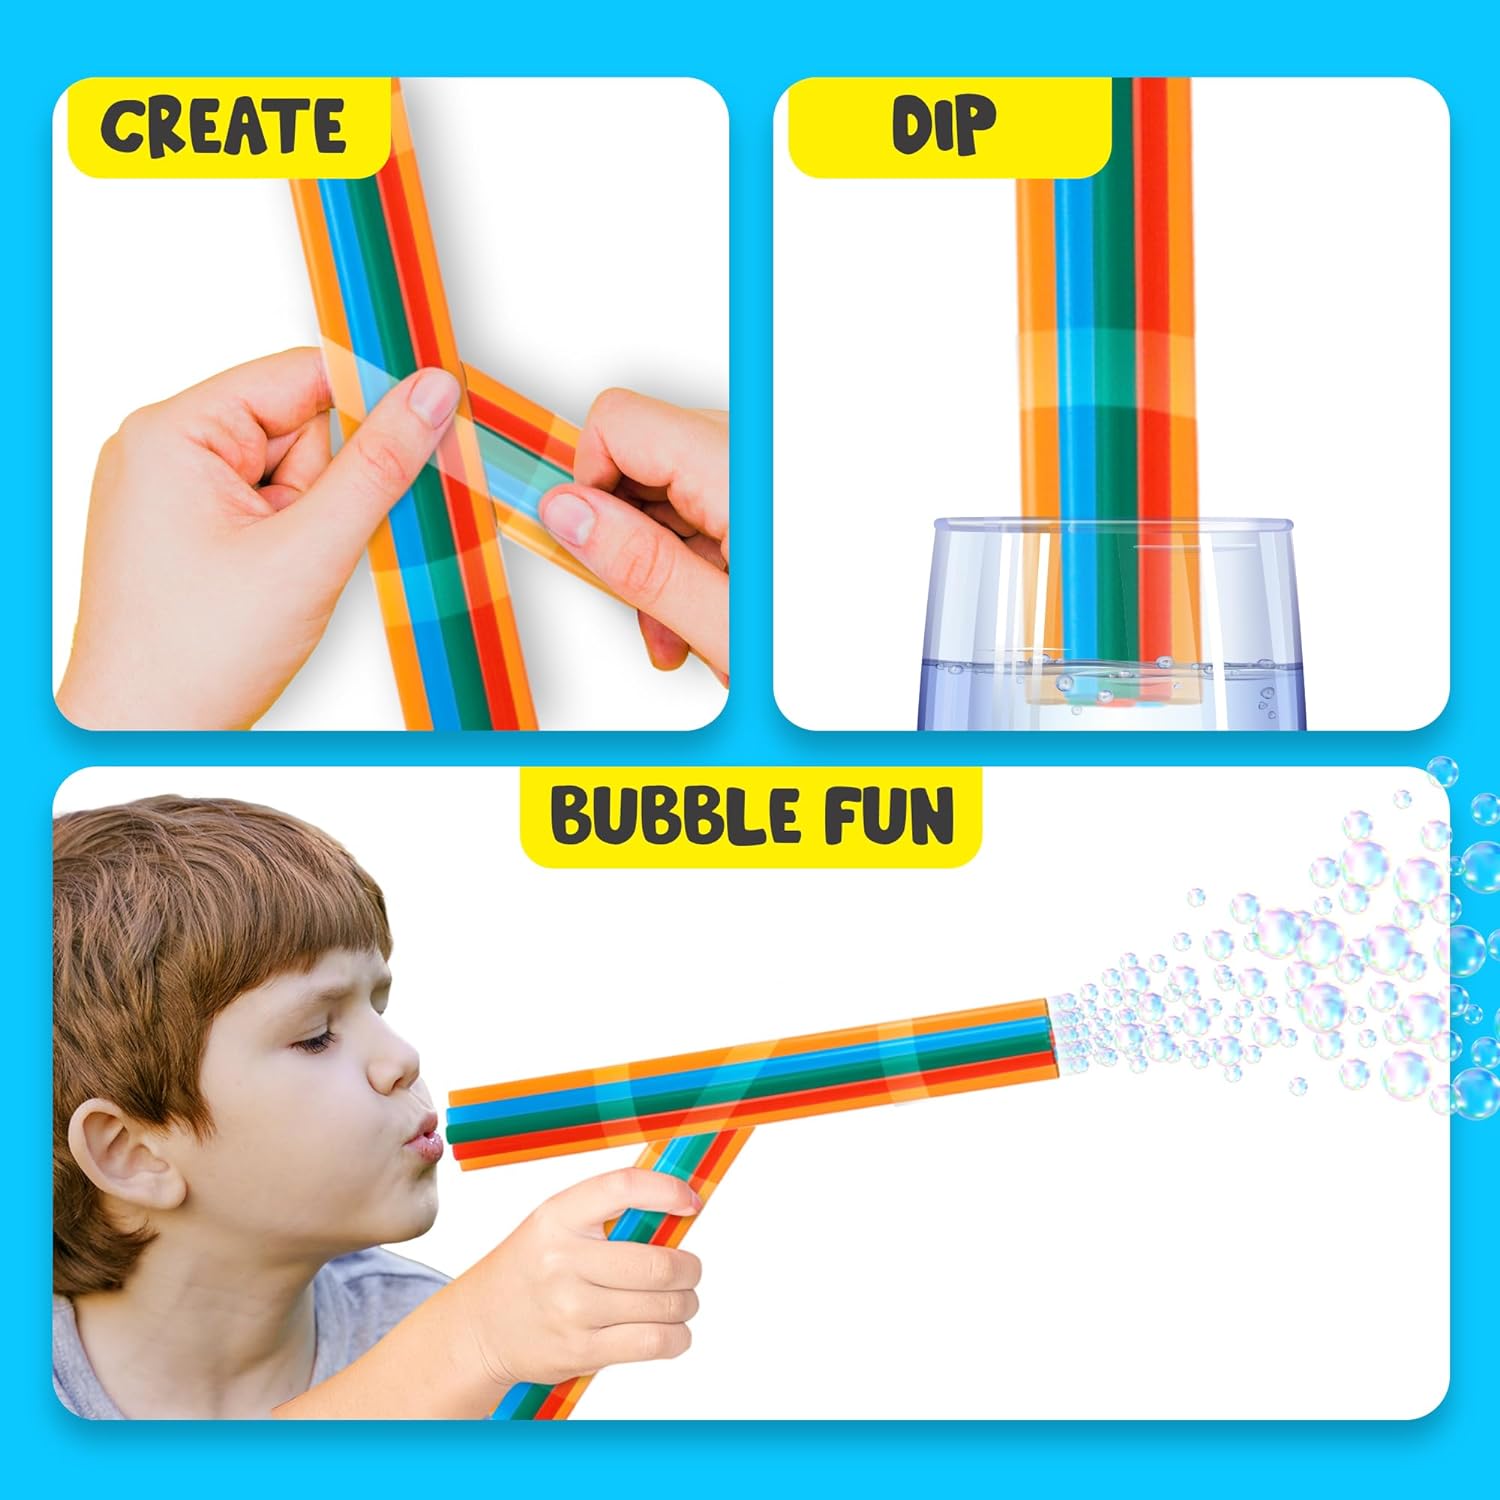 Bubble Straws by ArtCreativity - DIY Bubble Wand Craft for Kids - Set of 300 Straws, Bubble Solution and How-to Guide - - Bubble Wand Craft for Toddlers in 6 Colors - Bubble Blower Craft Ages 4-10